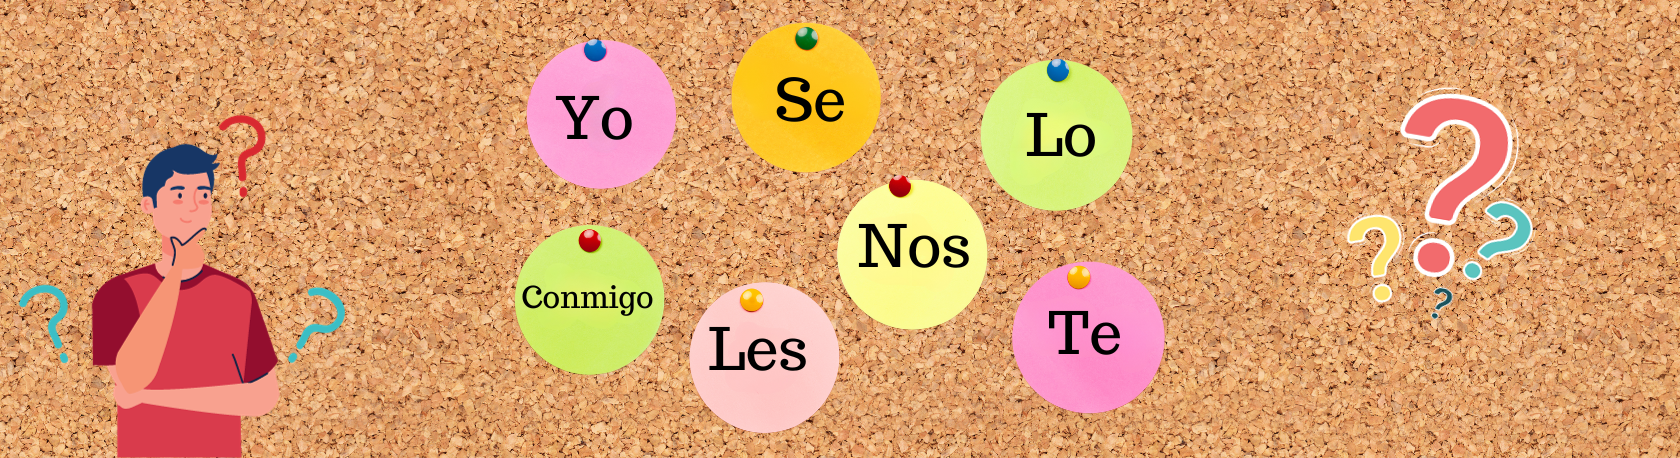 Improve your Spanish Grammar and practice the differences between pronouns (Higher Beginners II) - Practice Spanish - Learn Spanish - Speak Spanish - Easy Español